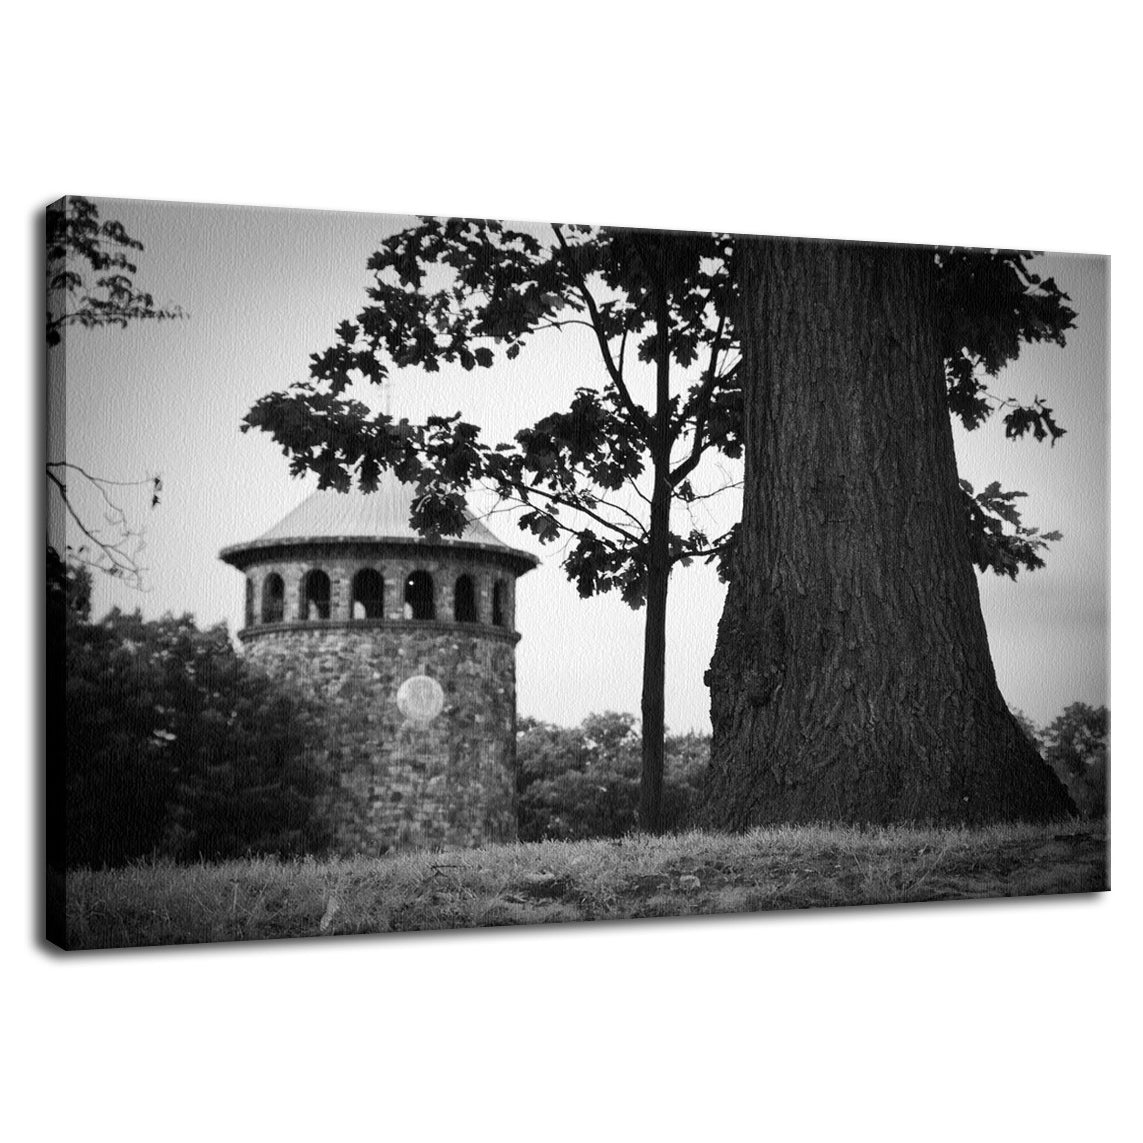 Rockford Tower in Black and White Fine Art Canvas Wall Art Prints  - PIPAFINEART